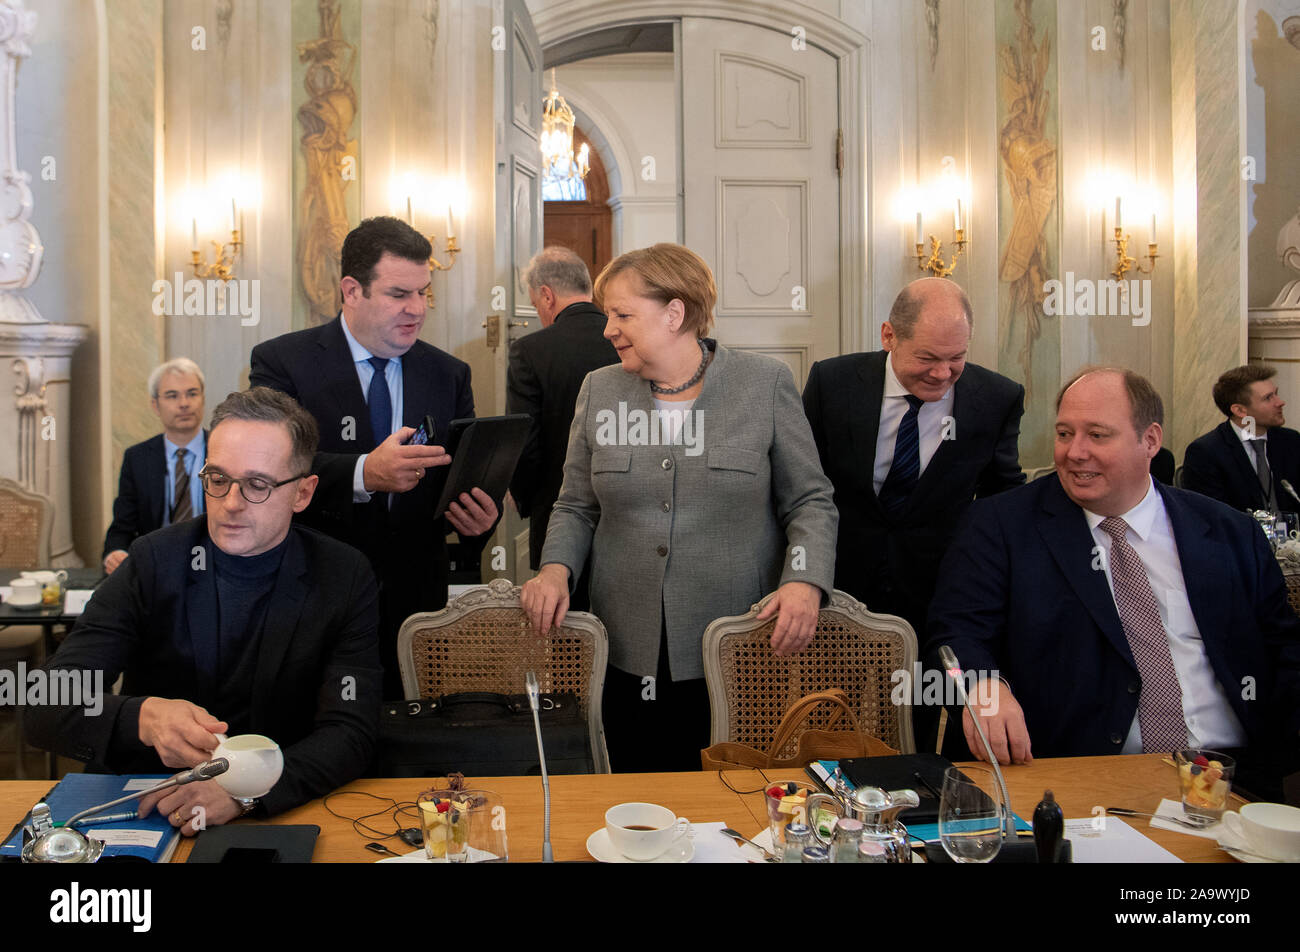 18 November 2019, Brandenburg, Meseberg: Federal Chancellor Angela Merkel (M, CDU) talks to Hubertus Heil (second row l, SPD), Federal Minister of Labour and Social Affairs, before the start of the federal government's closed session at Meseberg Castle. On the left is Heiko Maas (SPD), Foreign Minister, on the right Olaf Scholz (2nd from right, SPD), Federal Minister of Finance, and Helge Braun (r, CDU), Minister of the Chancellor's Office. The focus of the closed conference in the guest house of the Federal Government in Meseberg is digital change. Photo: Monika Skolimowska/dpa-Zentralbild/dp Stock Photo